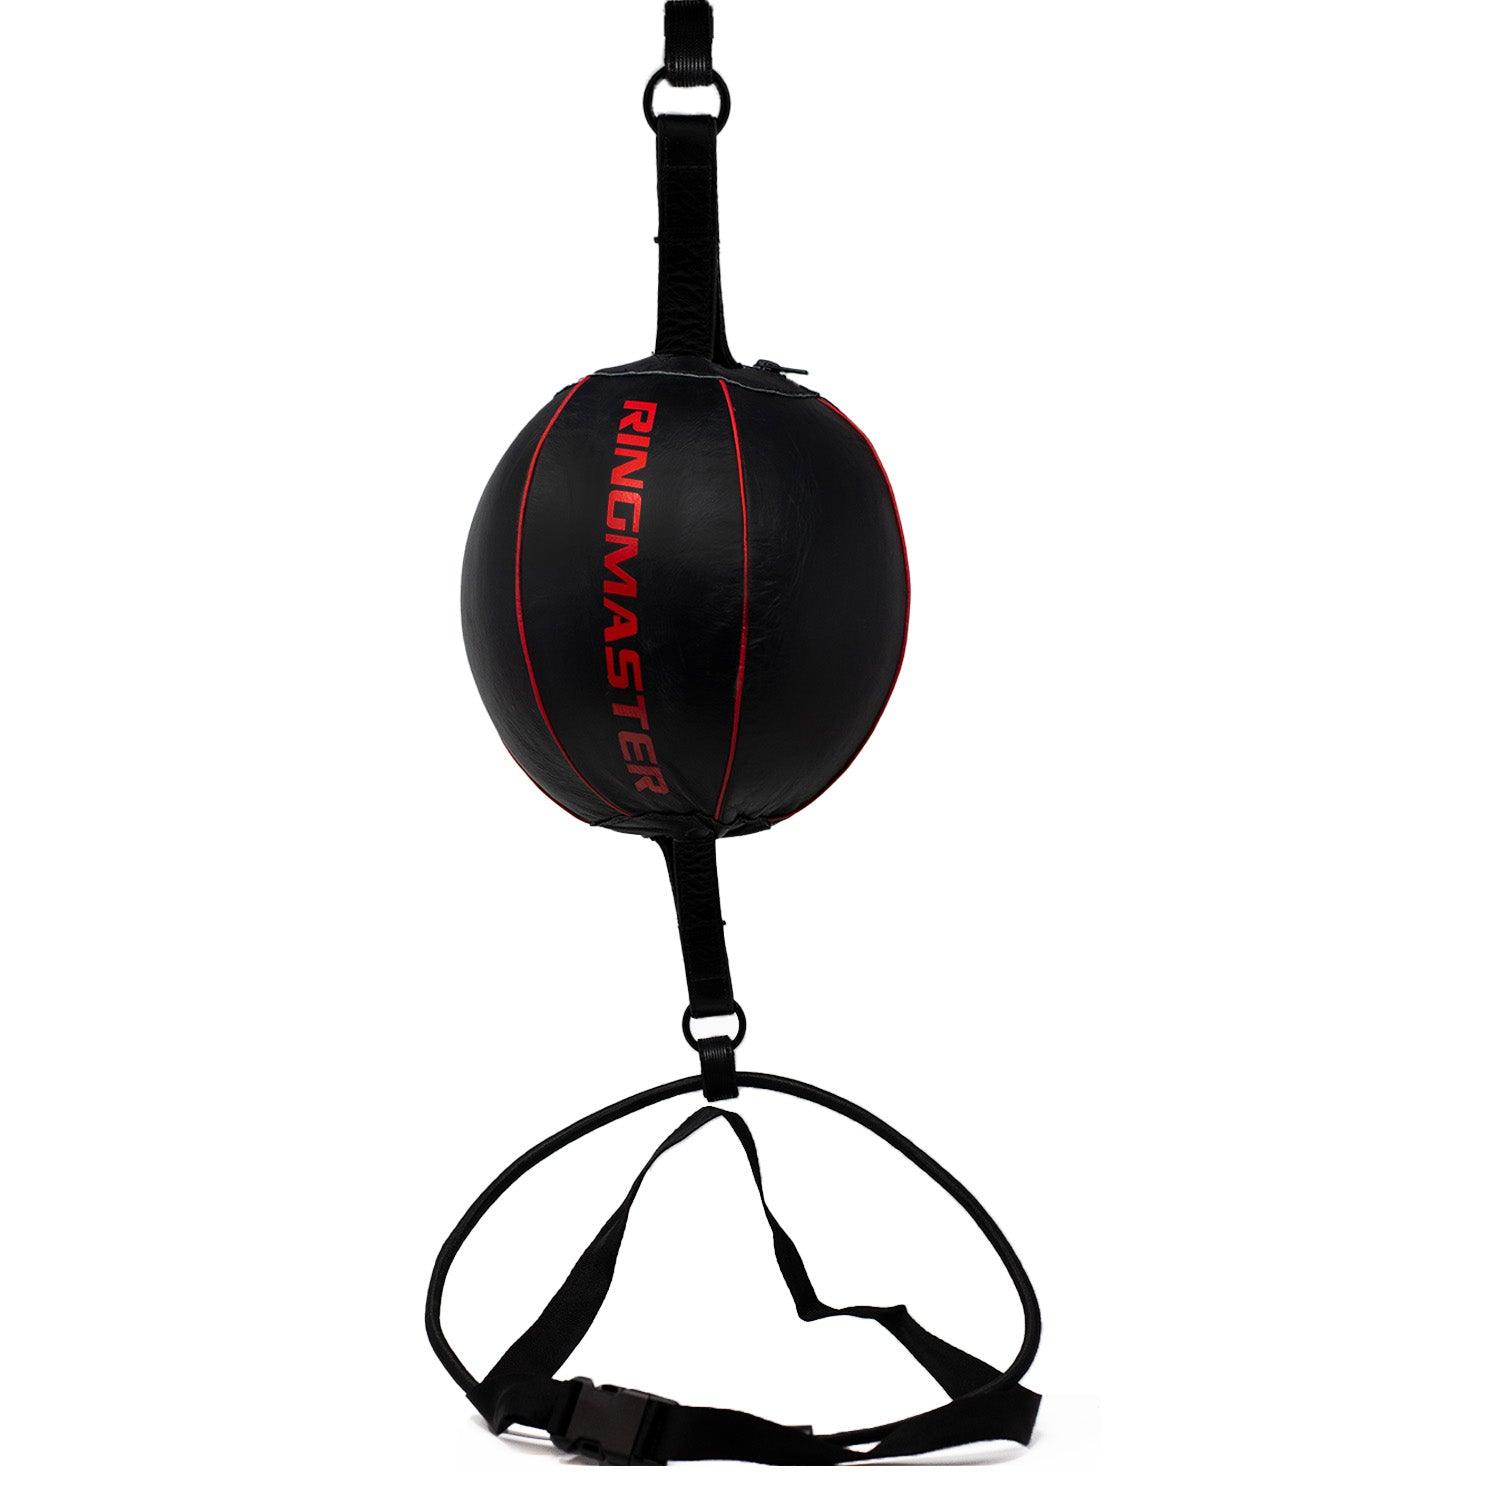 RingMaster Sports Double End Round Speed Ball Champion Series Synthetic Leather Red/Black - RINGMASTER SPORTS - Made For Champions